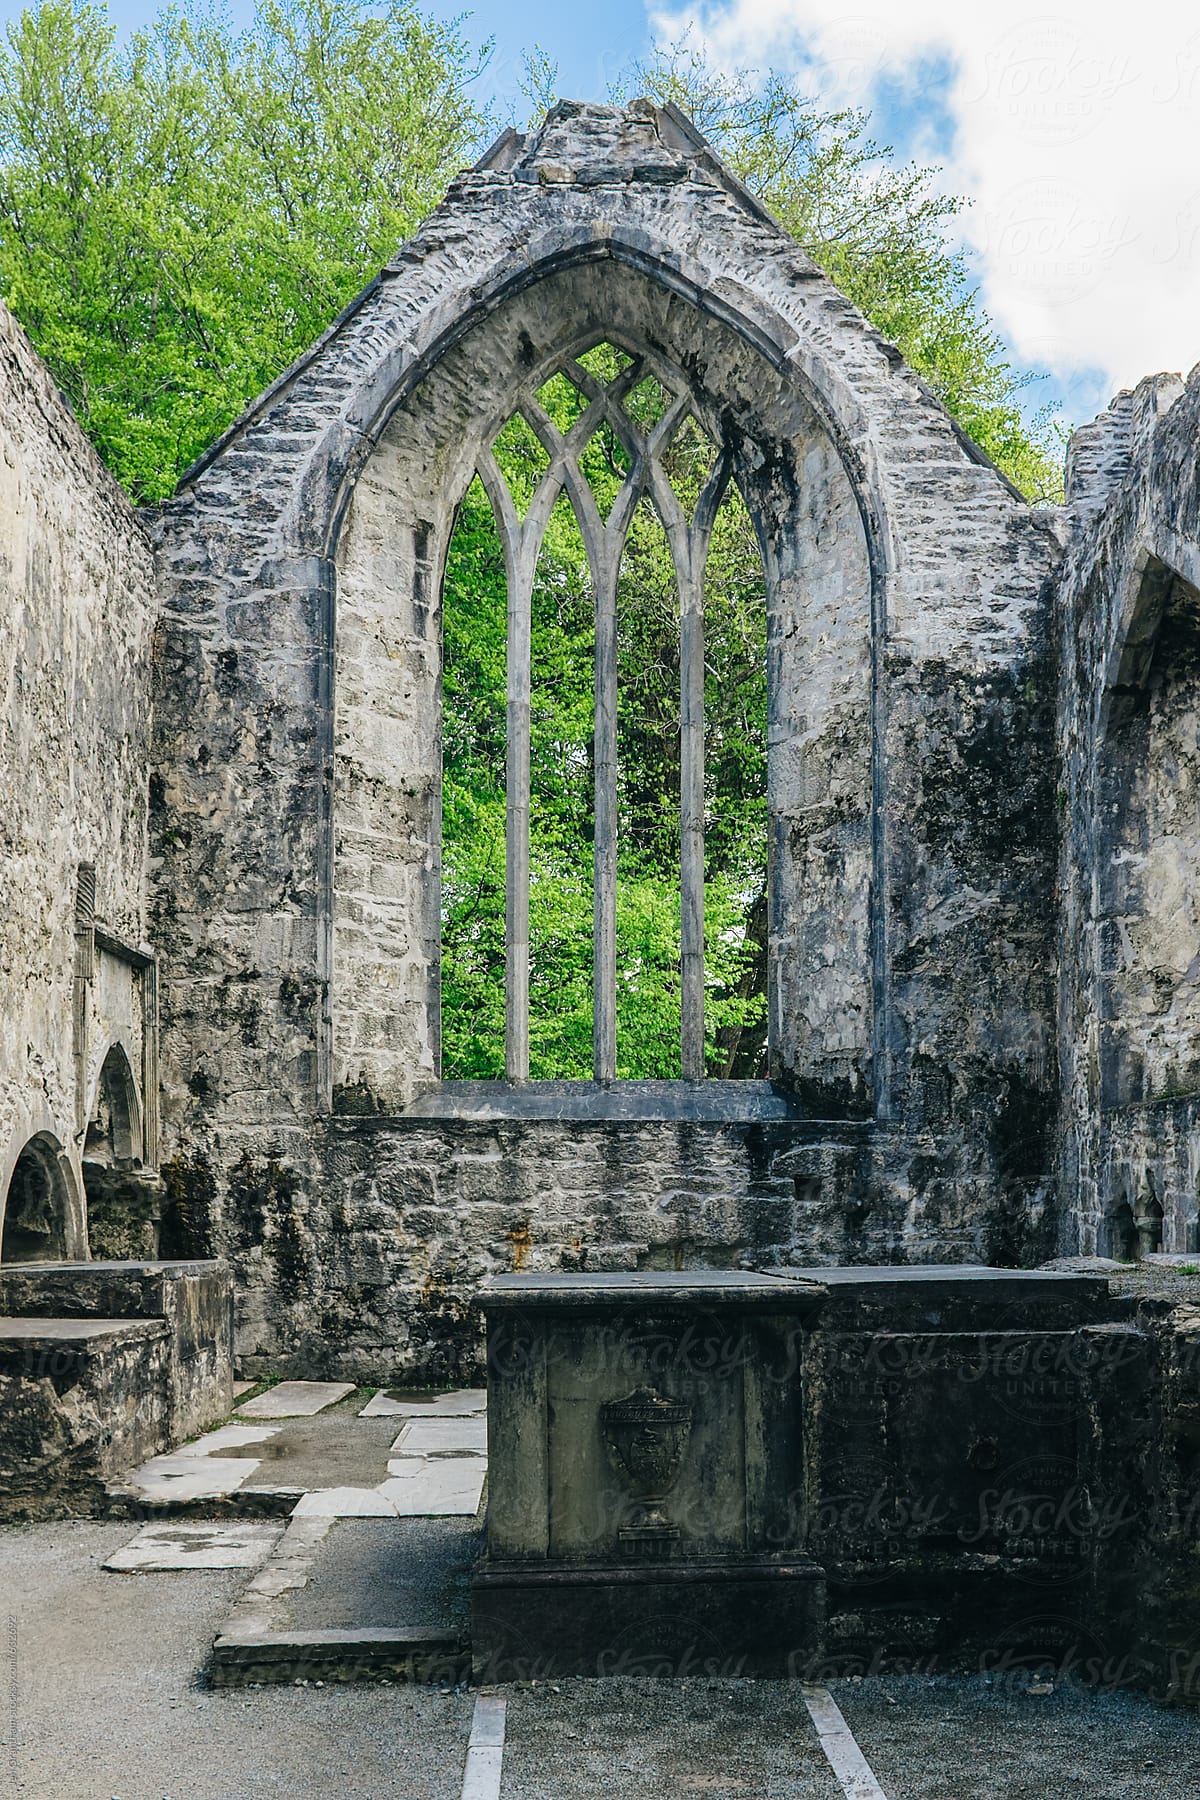 The ruins of Muckross Abbey